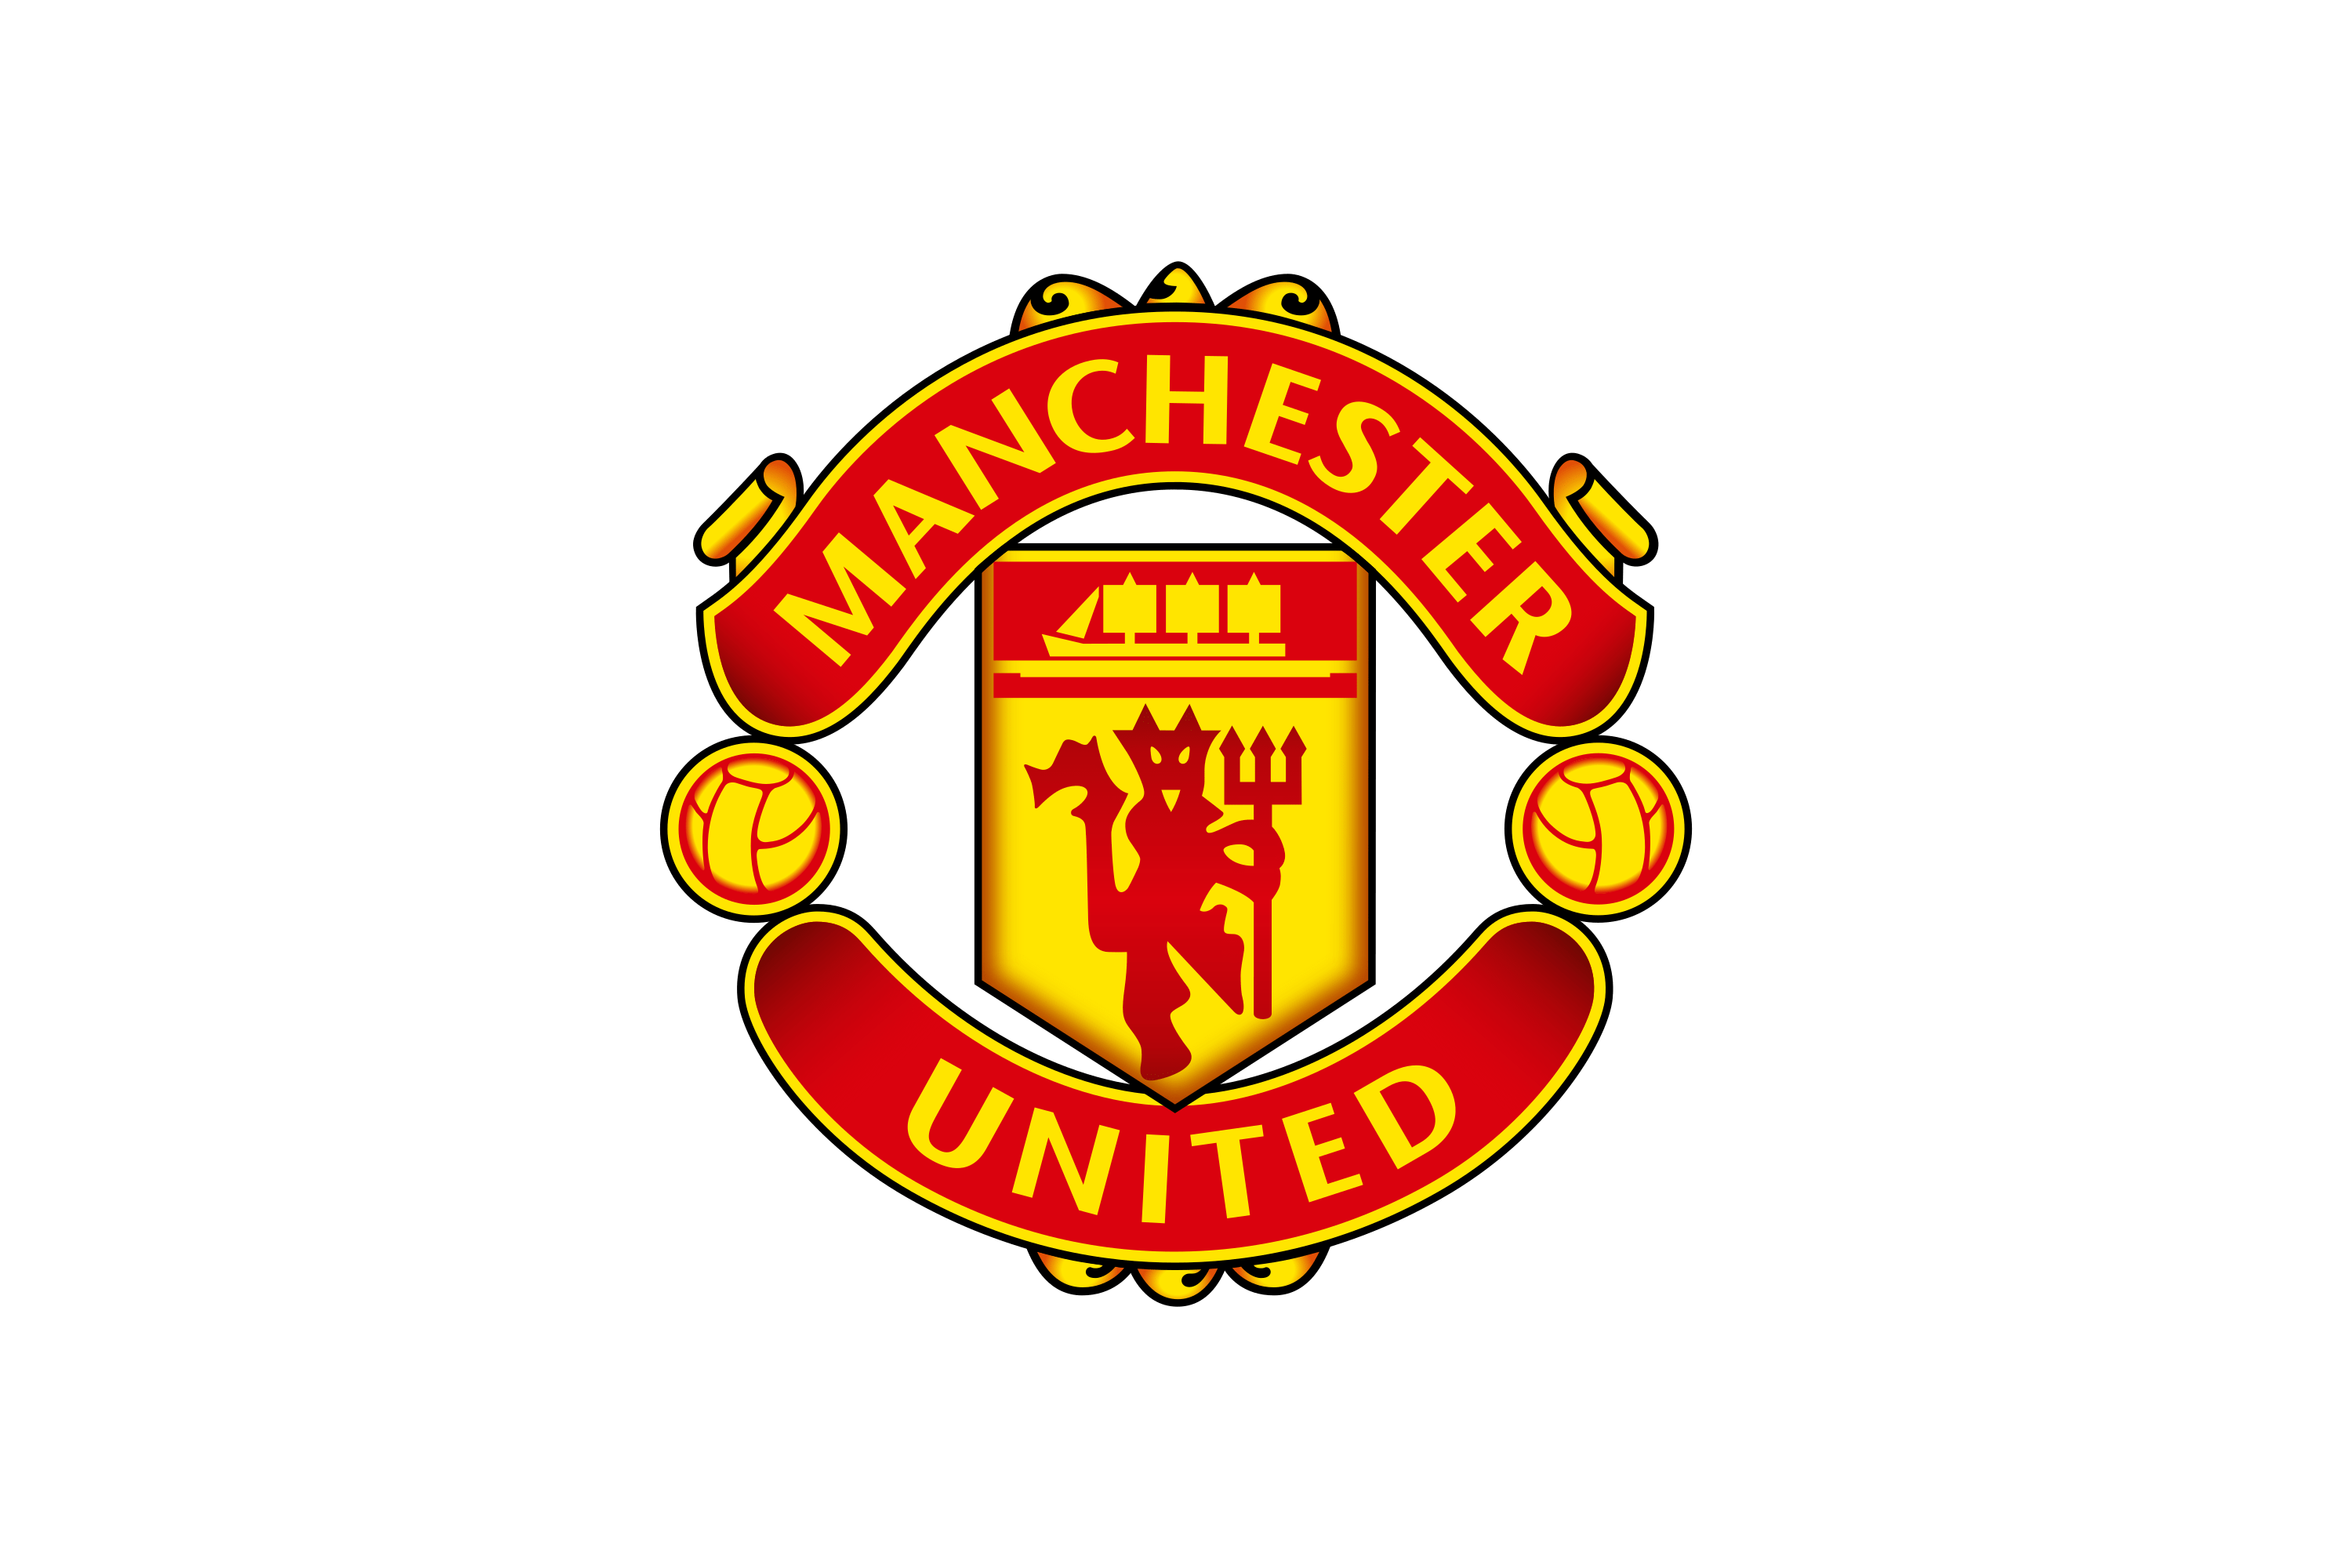 Manchester United - A Tale of Triumph and Resilience